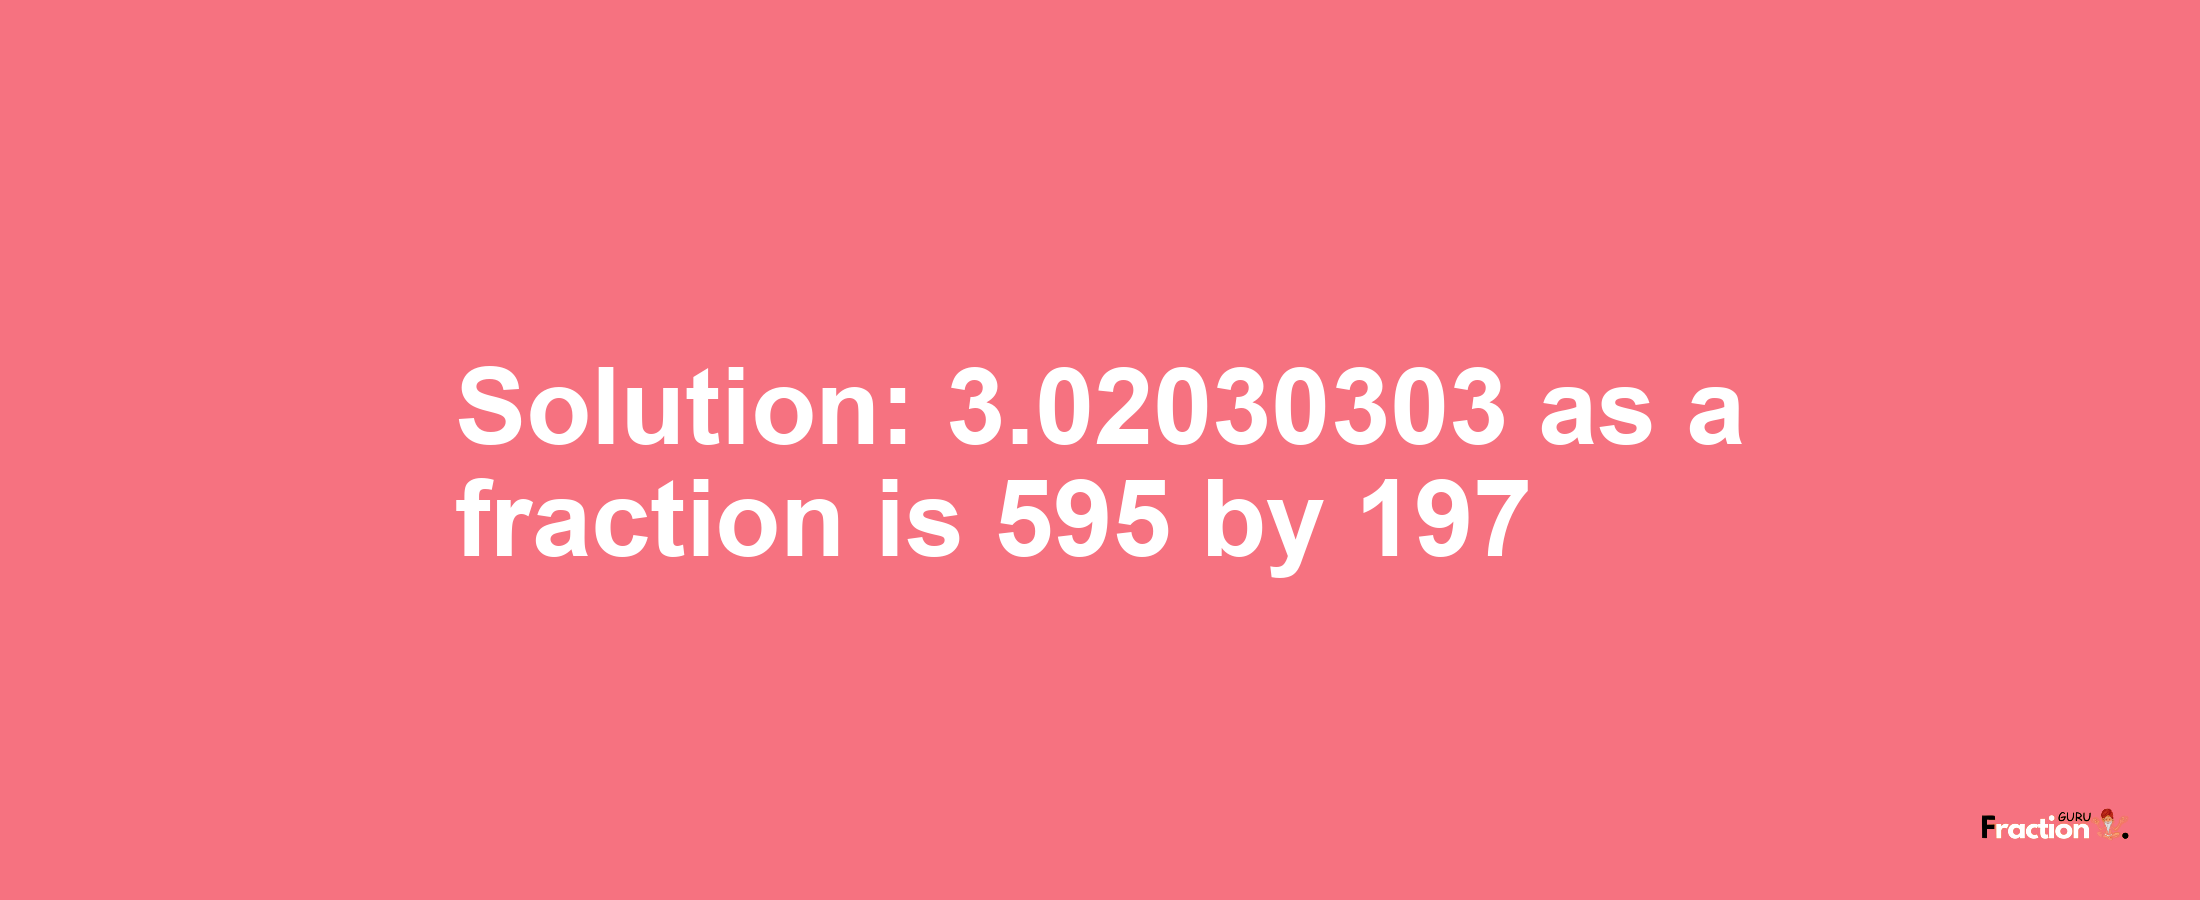 Solution:3.02030303 as a fraction is 595/197